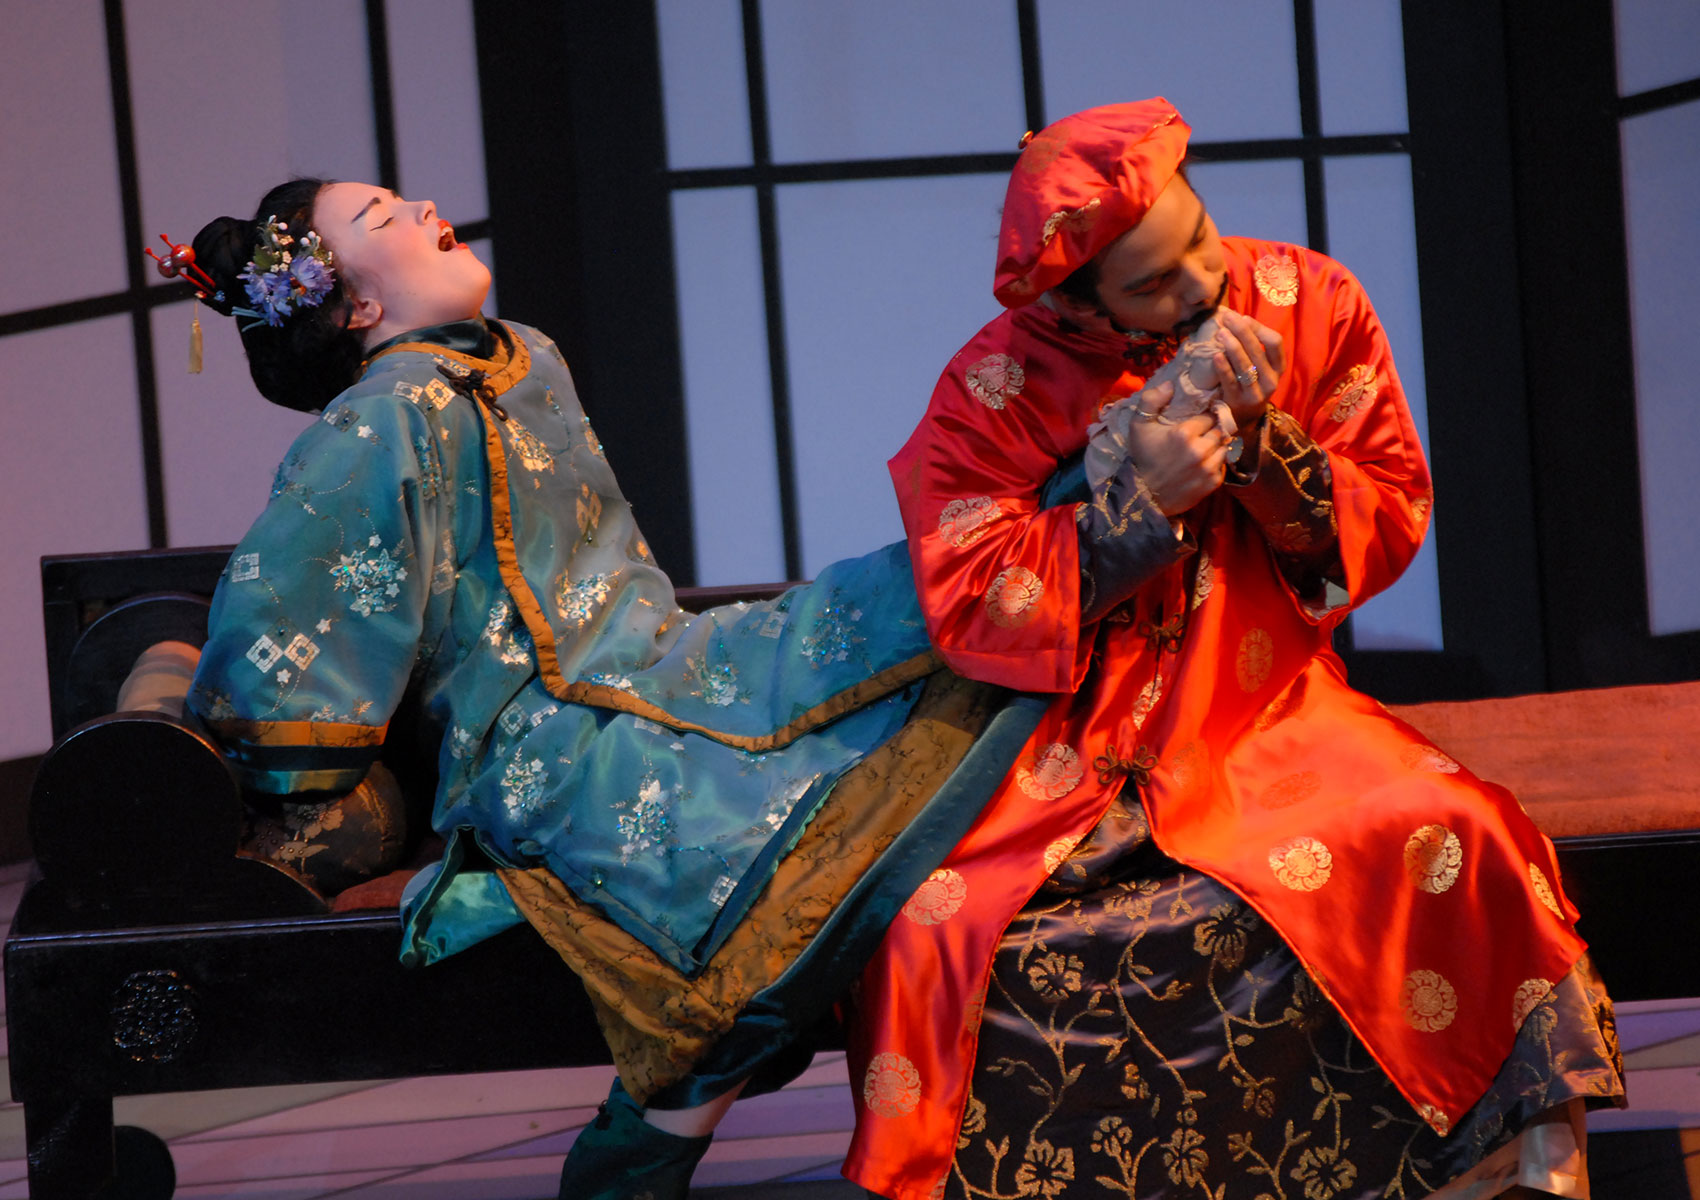 A man in Asian-inspired attire is sitting on a bench, kissing the bound foot of a woman next to him dressed in Asian-inspired attire; she is leaning back with her mouth open and her eyes closed.